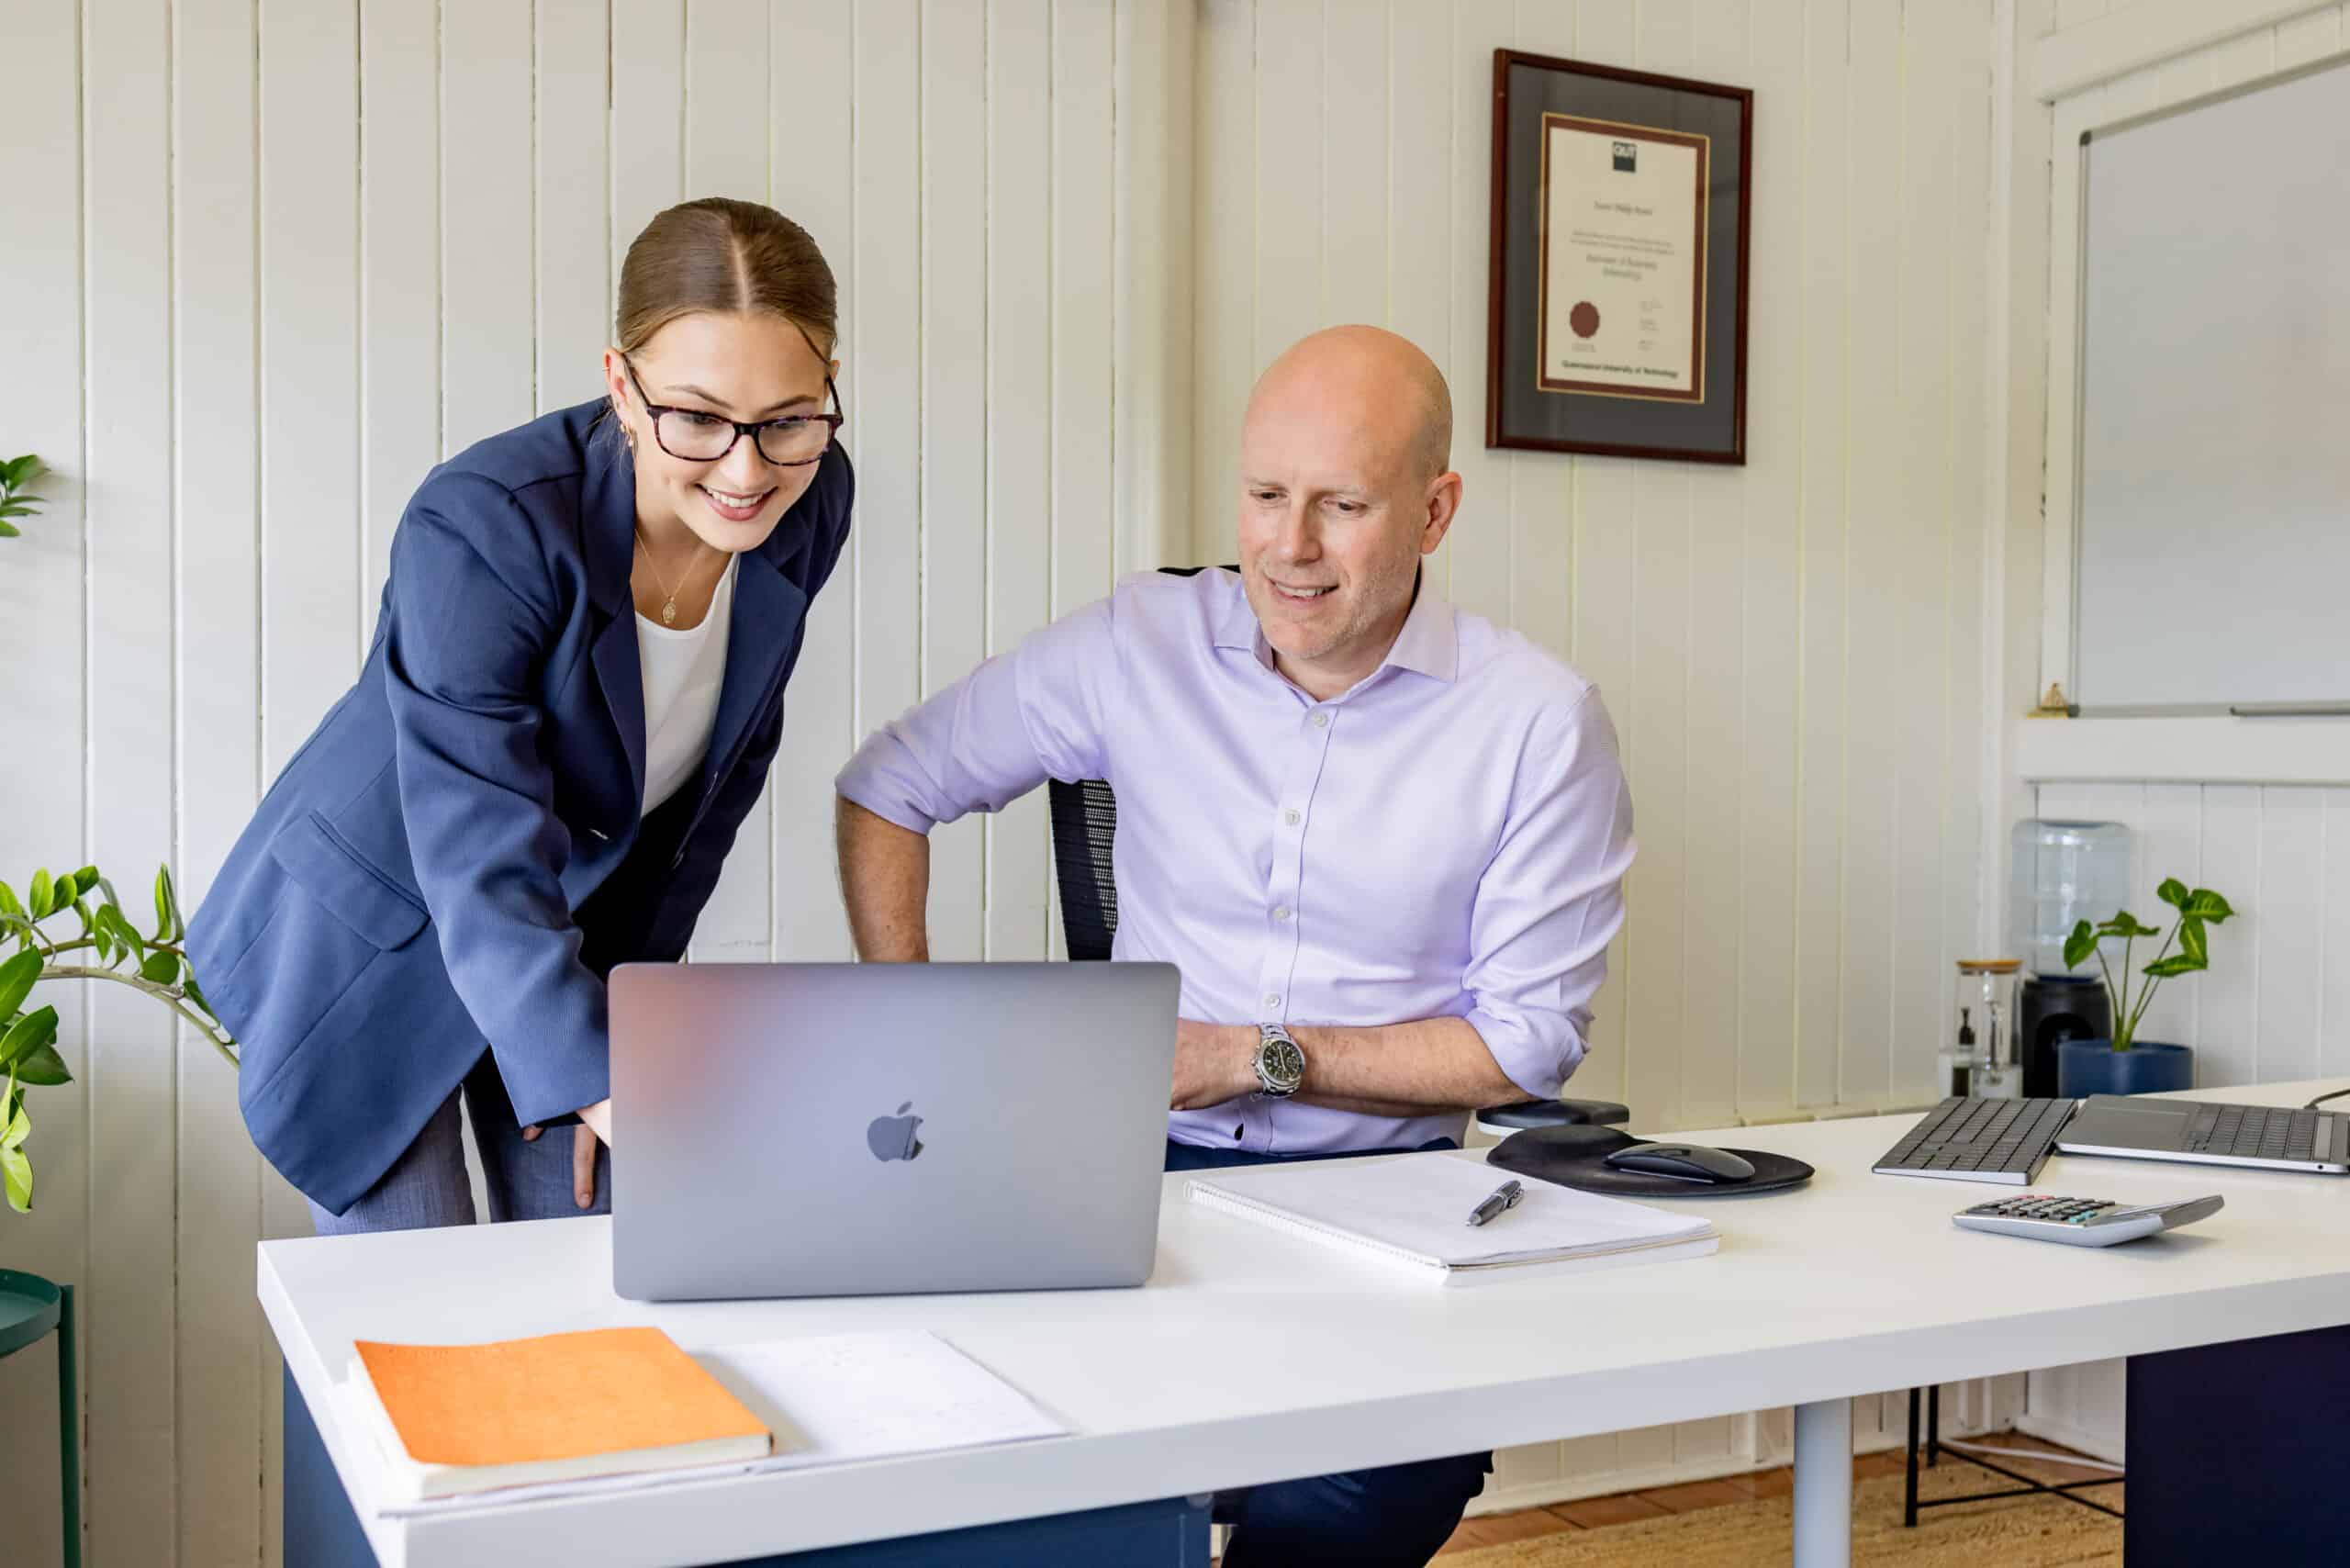 A female financial advisor and a male financial advisor are looking at a laptop screen as the female financial advisor shows the male something.